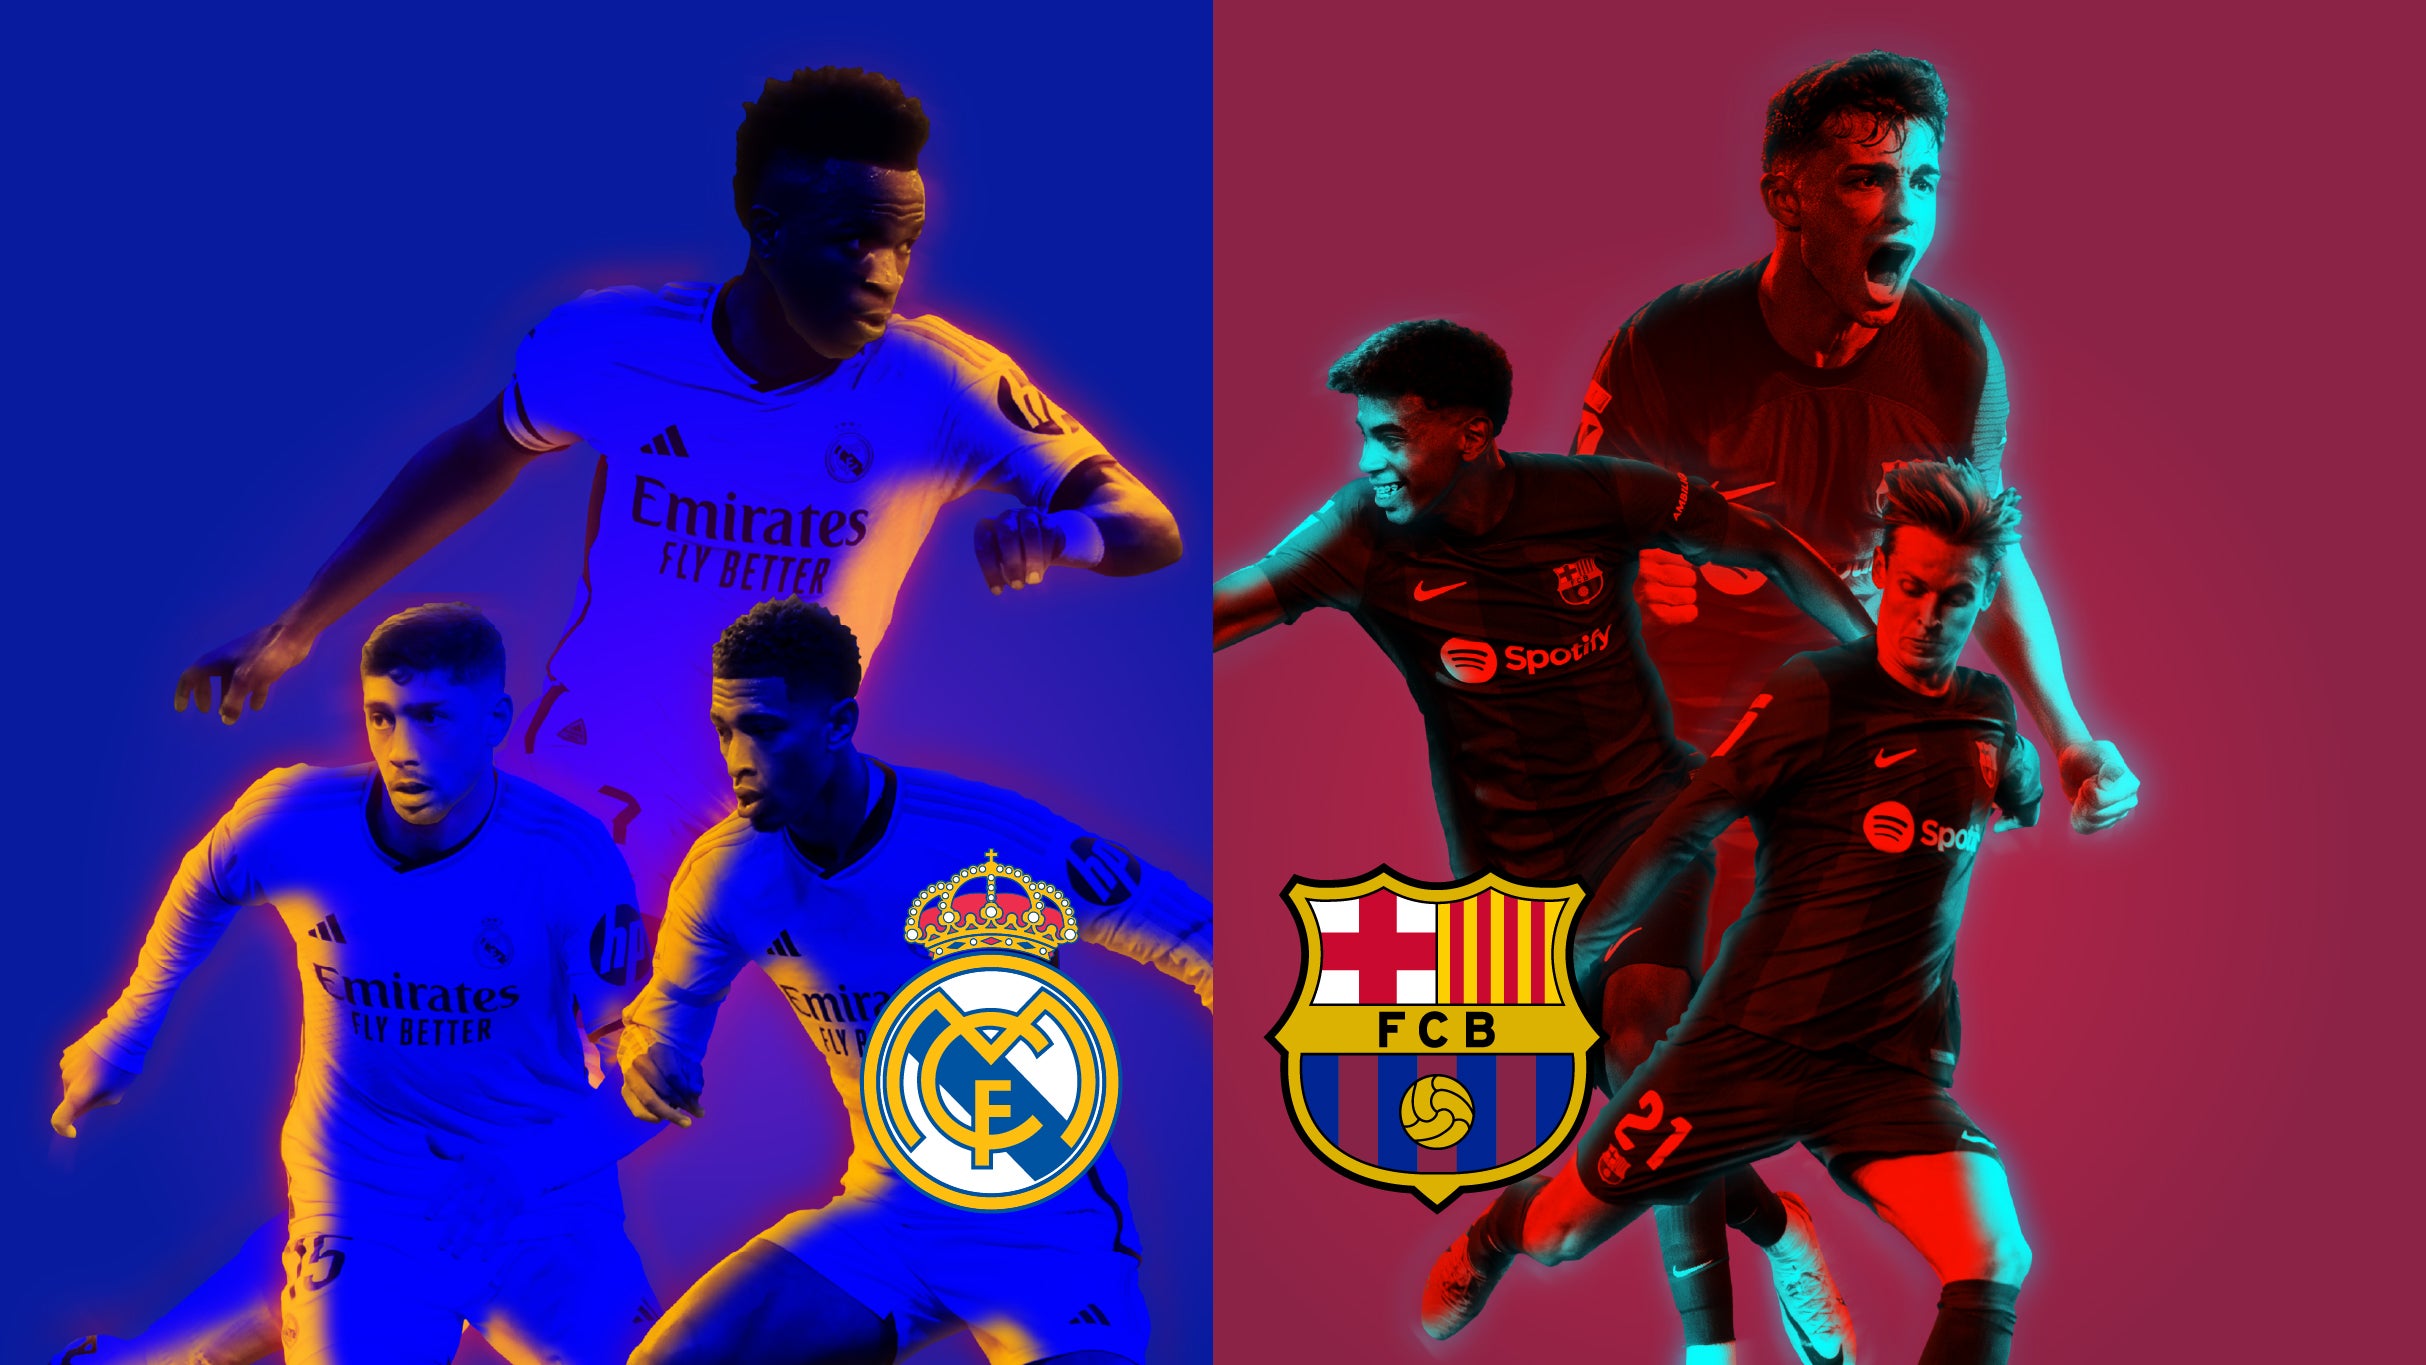 Real Madrid CF vs FC Barcelona - Soccer Champions Tour in East Rutherford promo photo for Real Madrid presale offer code